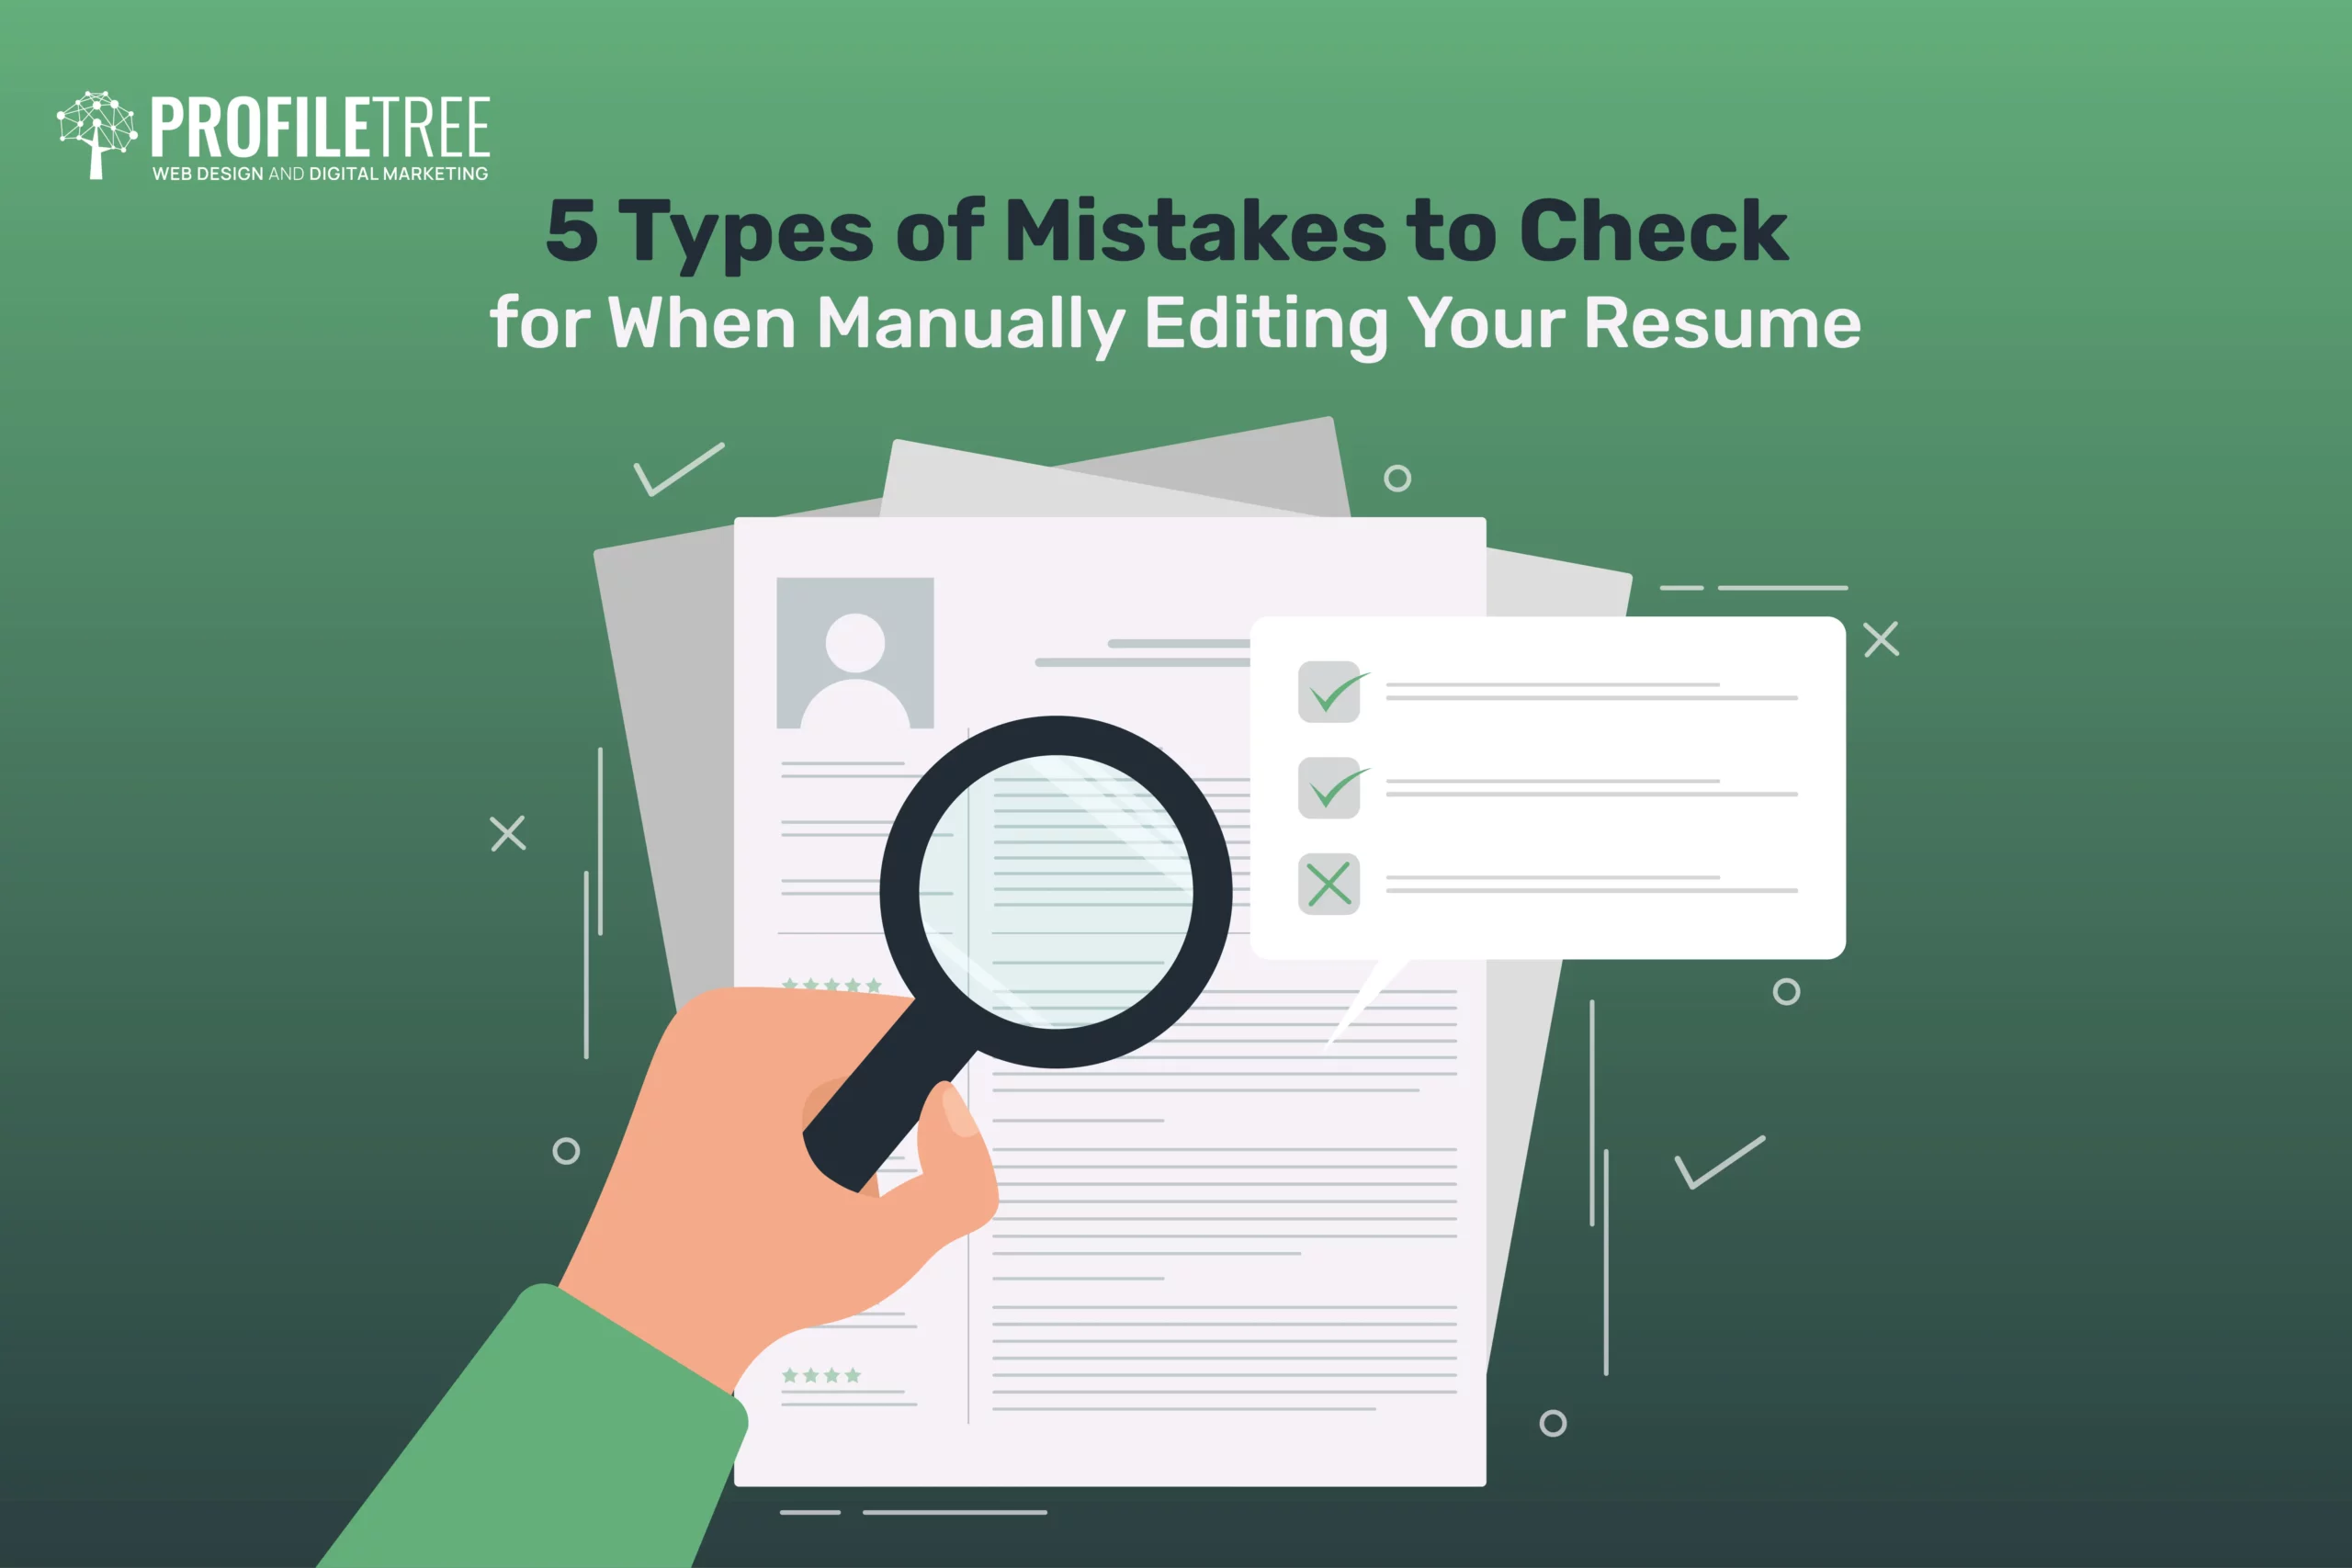 Types of Mistakes to Check for When Manually Editing Your Resume